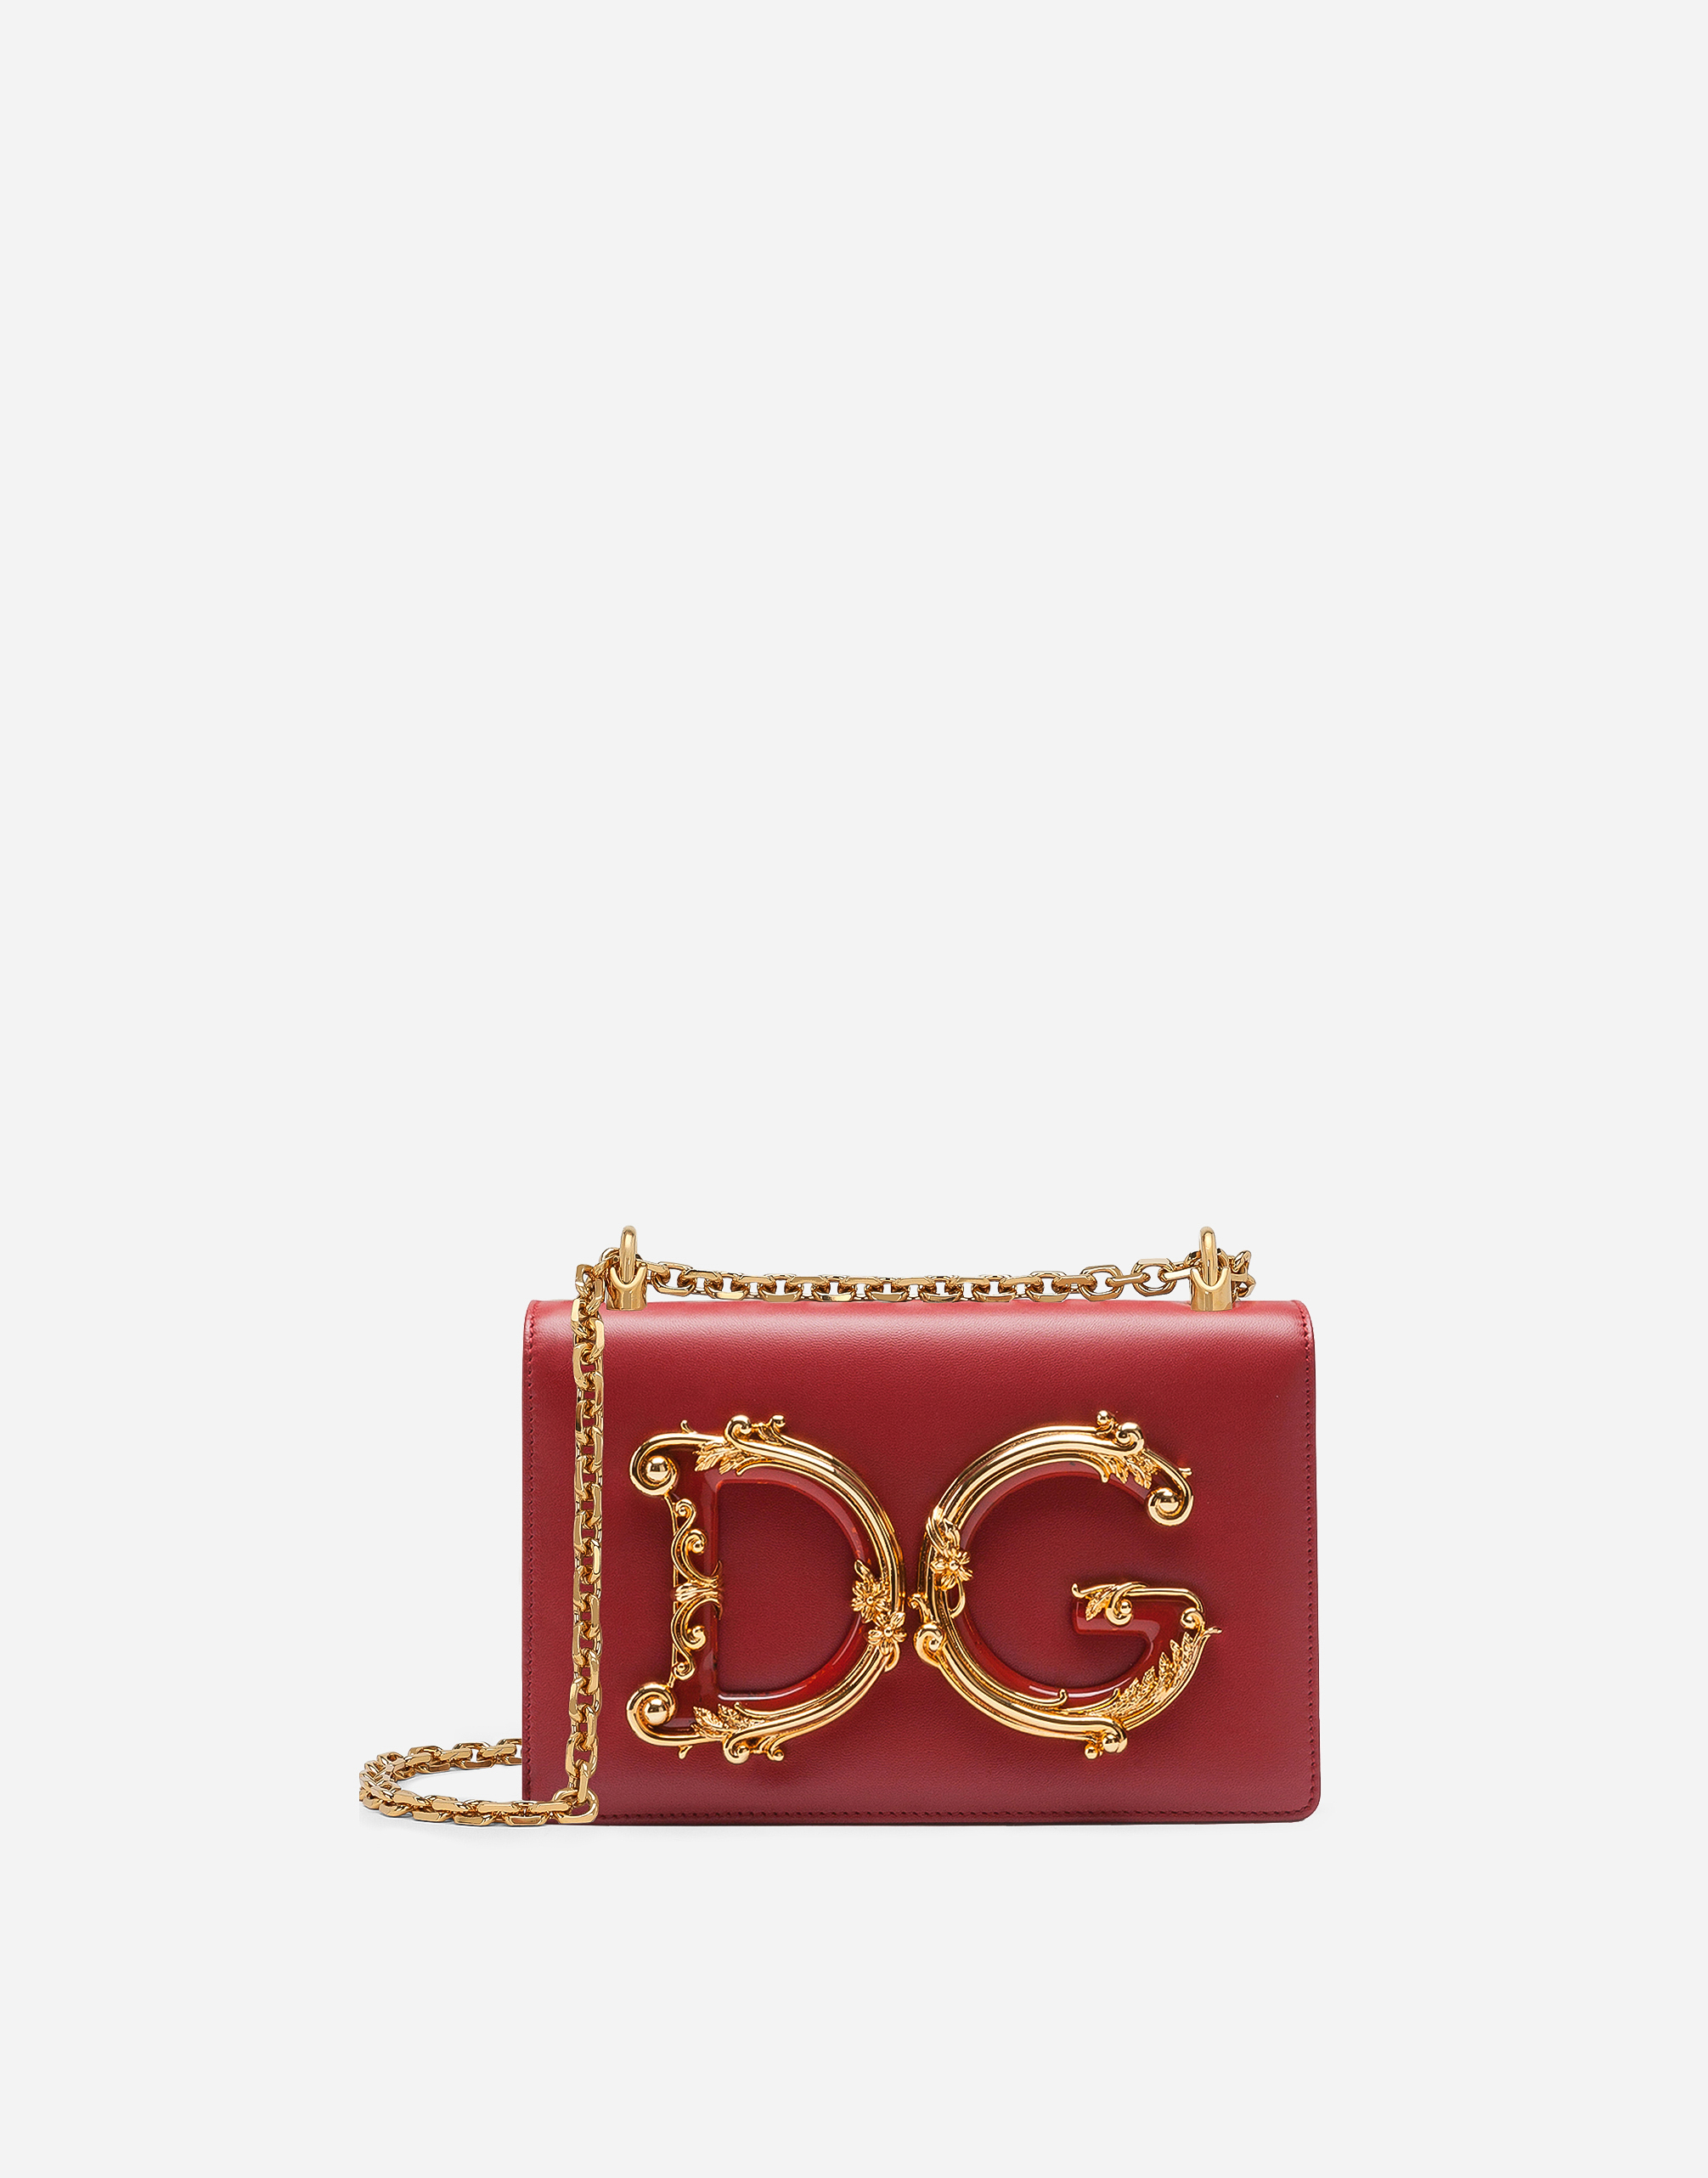 Nappa leather DG Girls bag in Red